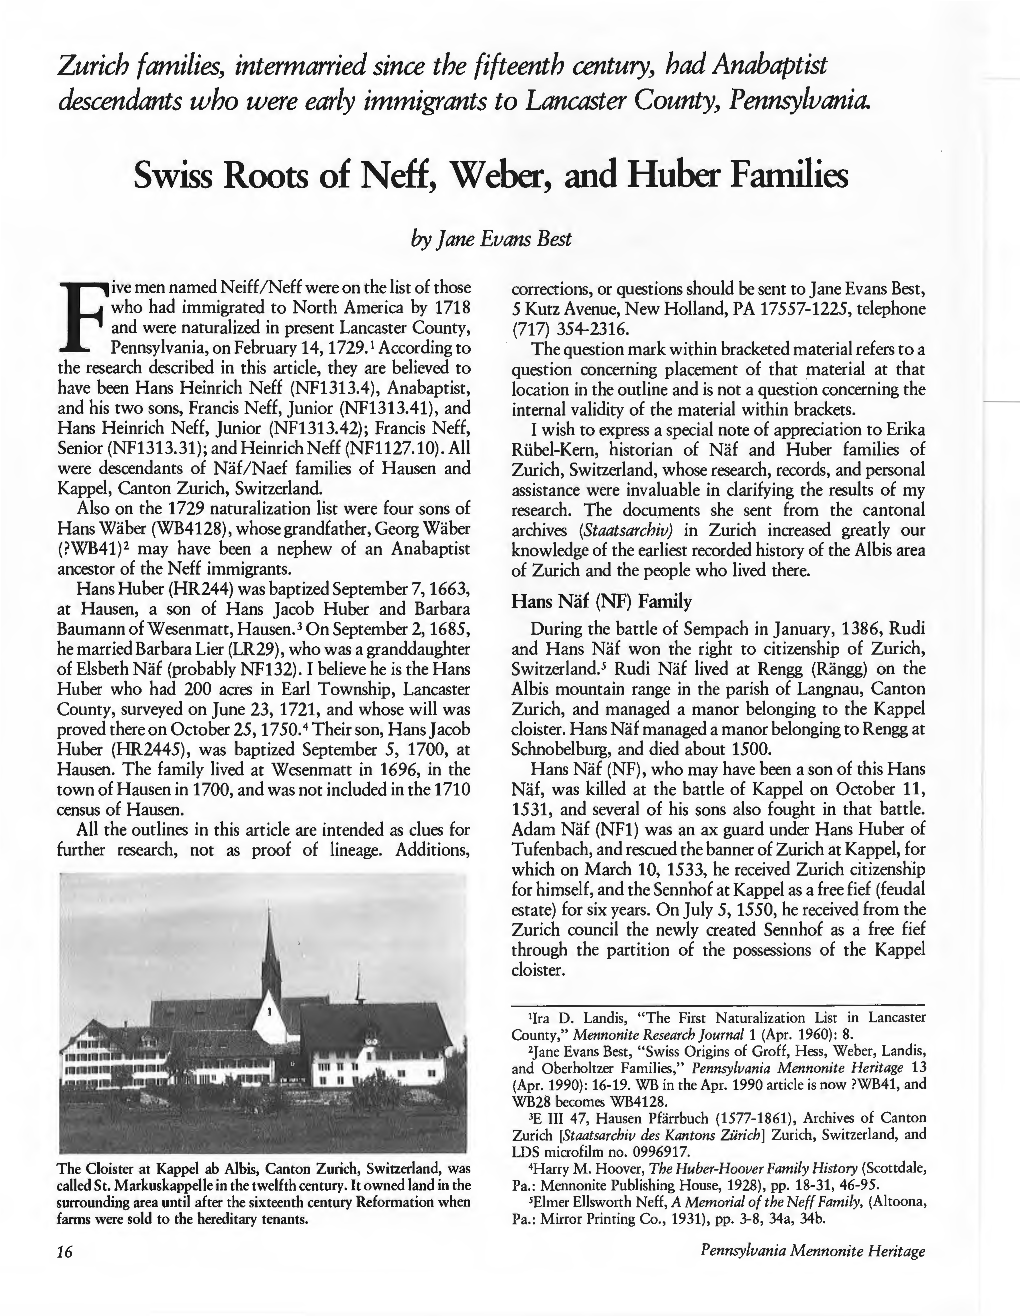 Swiss Roots of Neff, Weber, and Huber Families